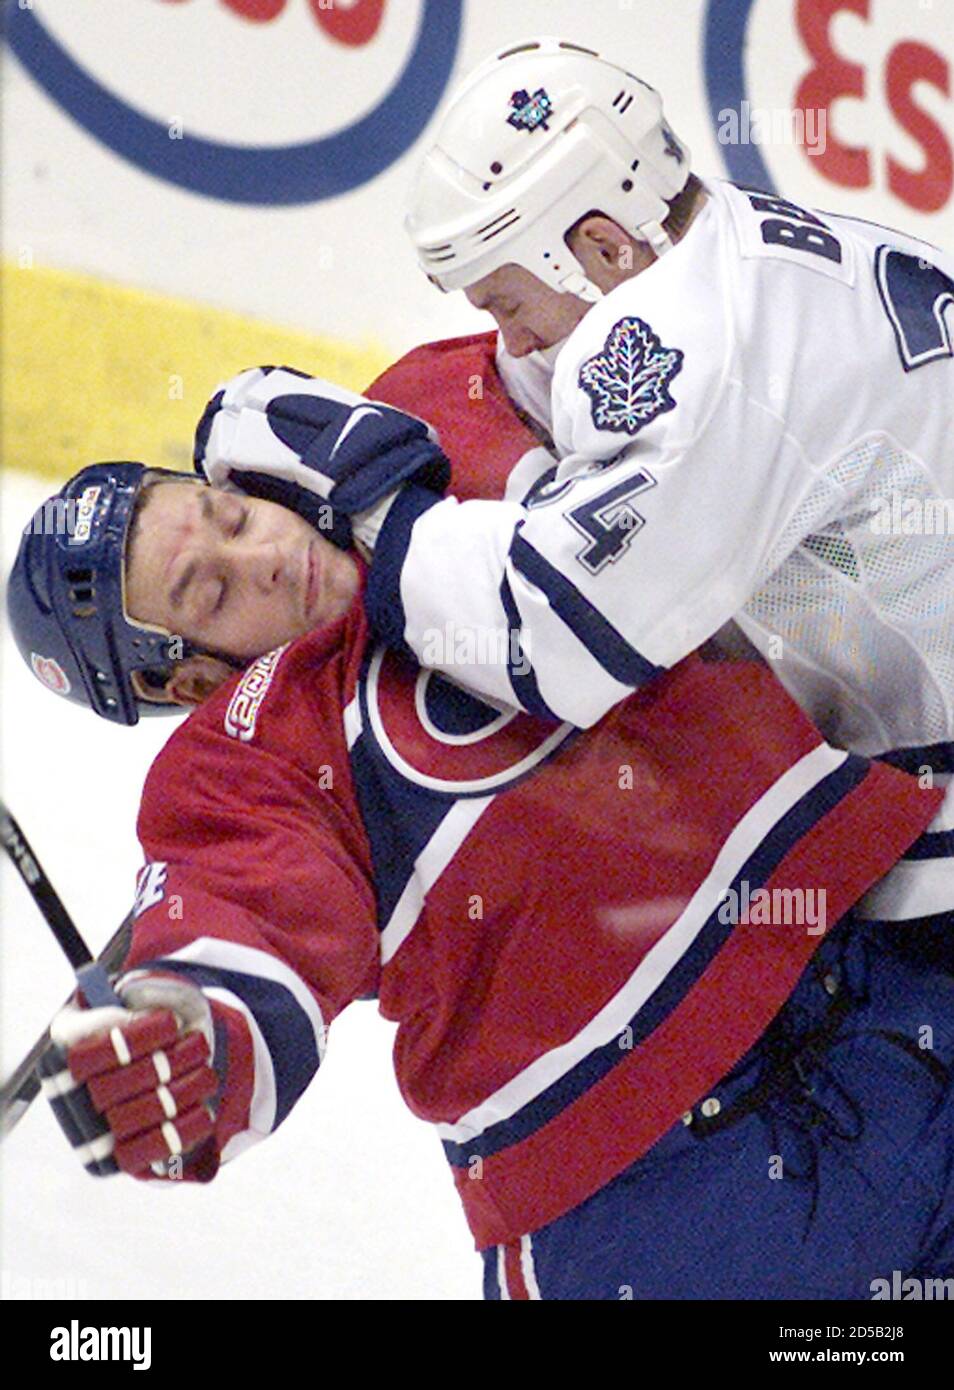 Montreal Canadiens center Scott Thornton (L) gets roughed up in the corner by Toronto Maple Leafs defenseman Bryan Berard during first period National Hockey League action at the Air Canada Centre in Toronto, December 18.  ANW/SV Stock Photo